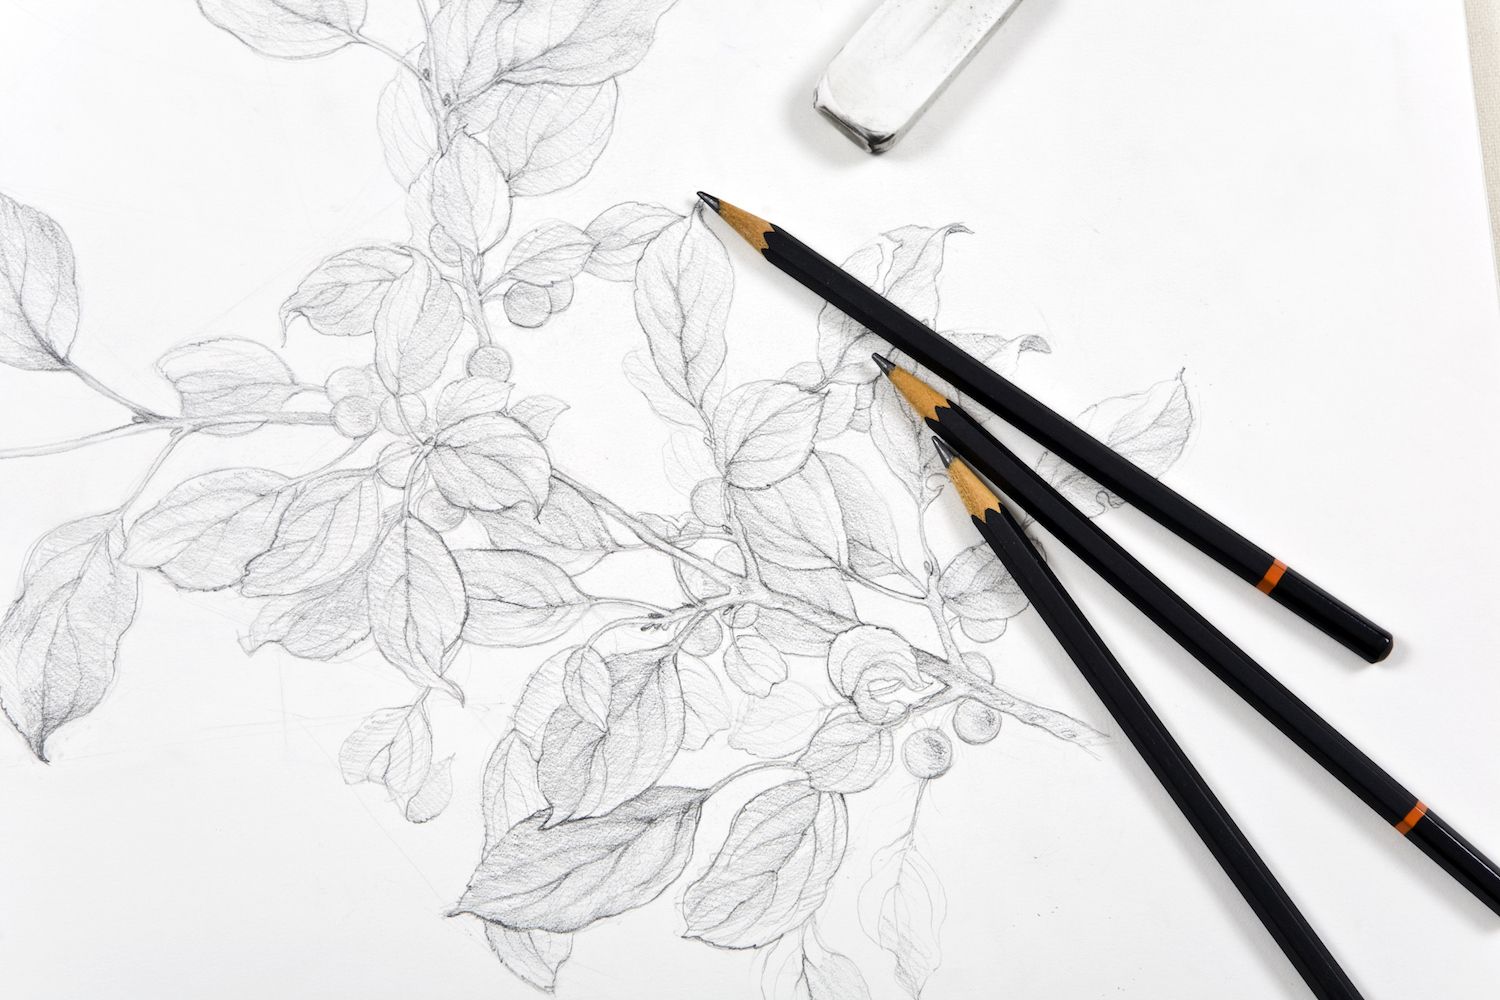 Pencil Sketching: The Ultimate Pencil Art & Drawing Course | Udemy-saigonsouth.com.vn